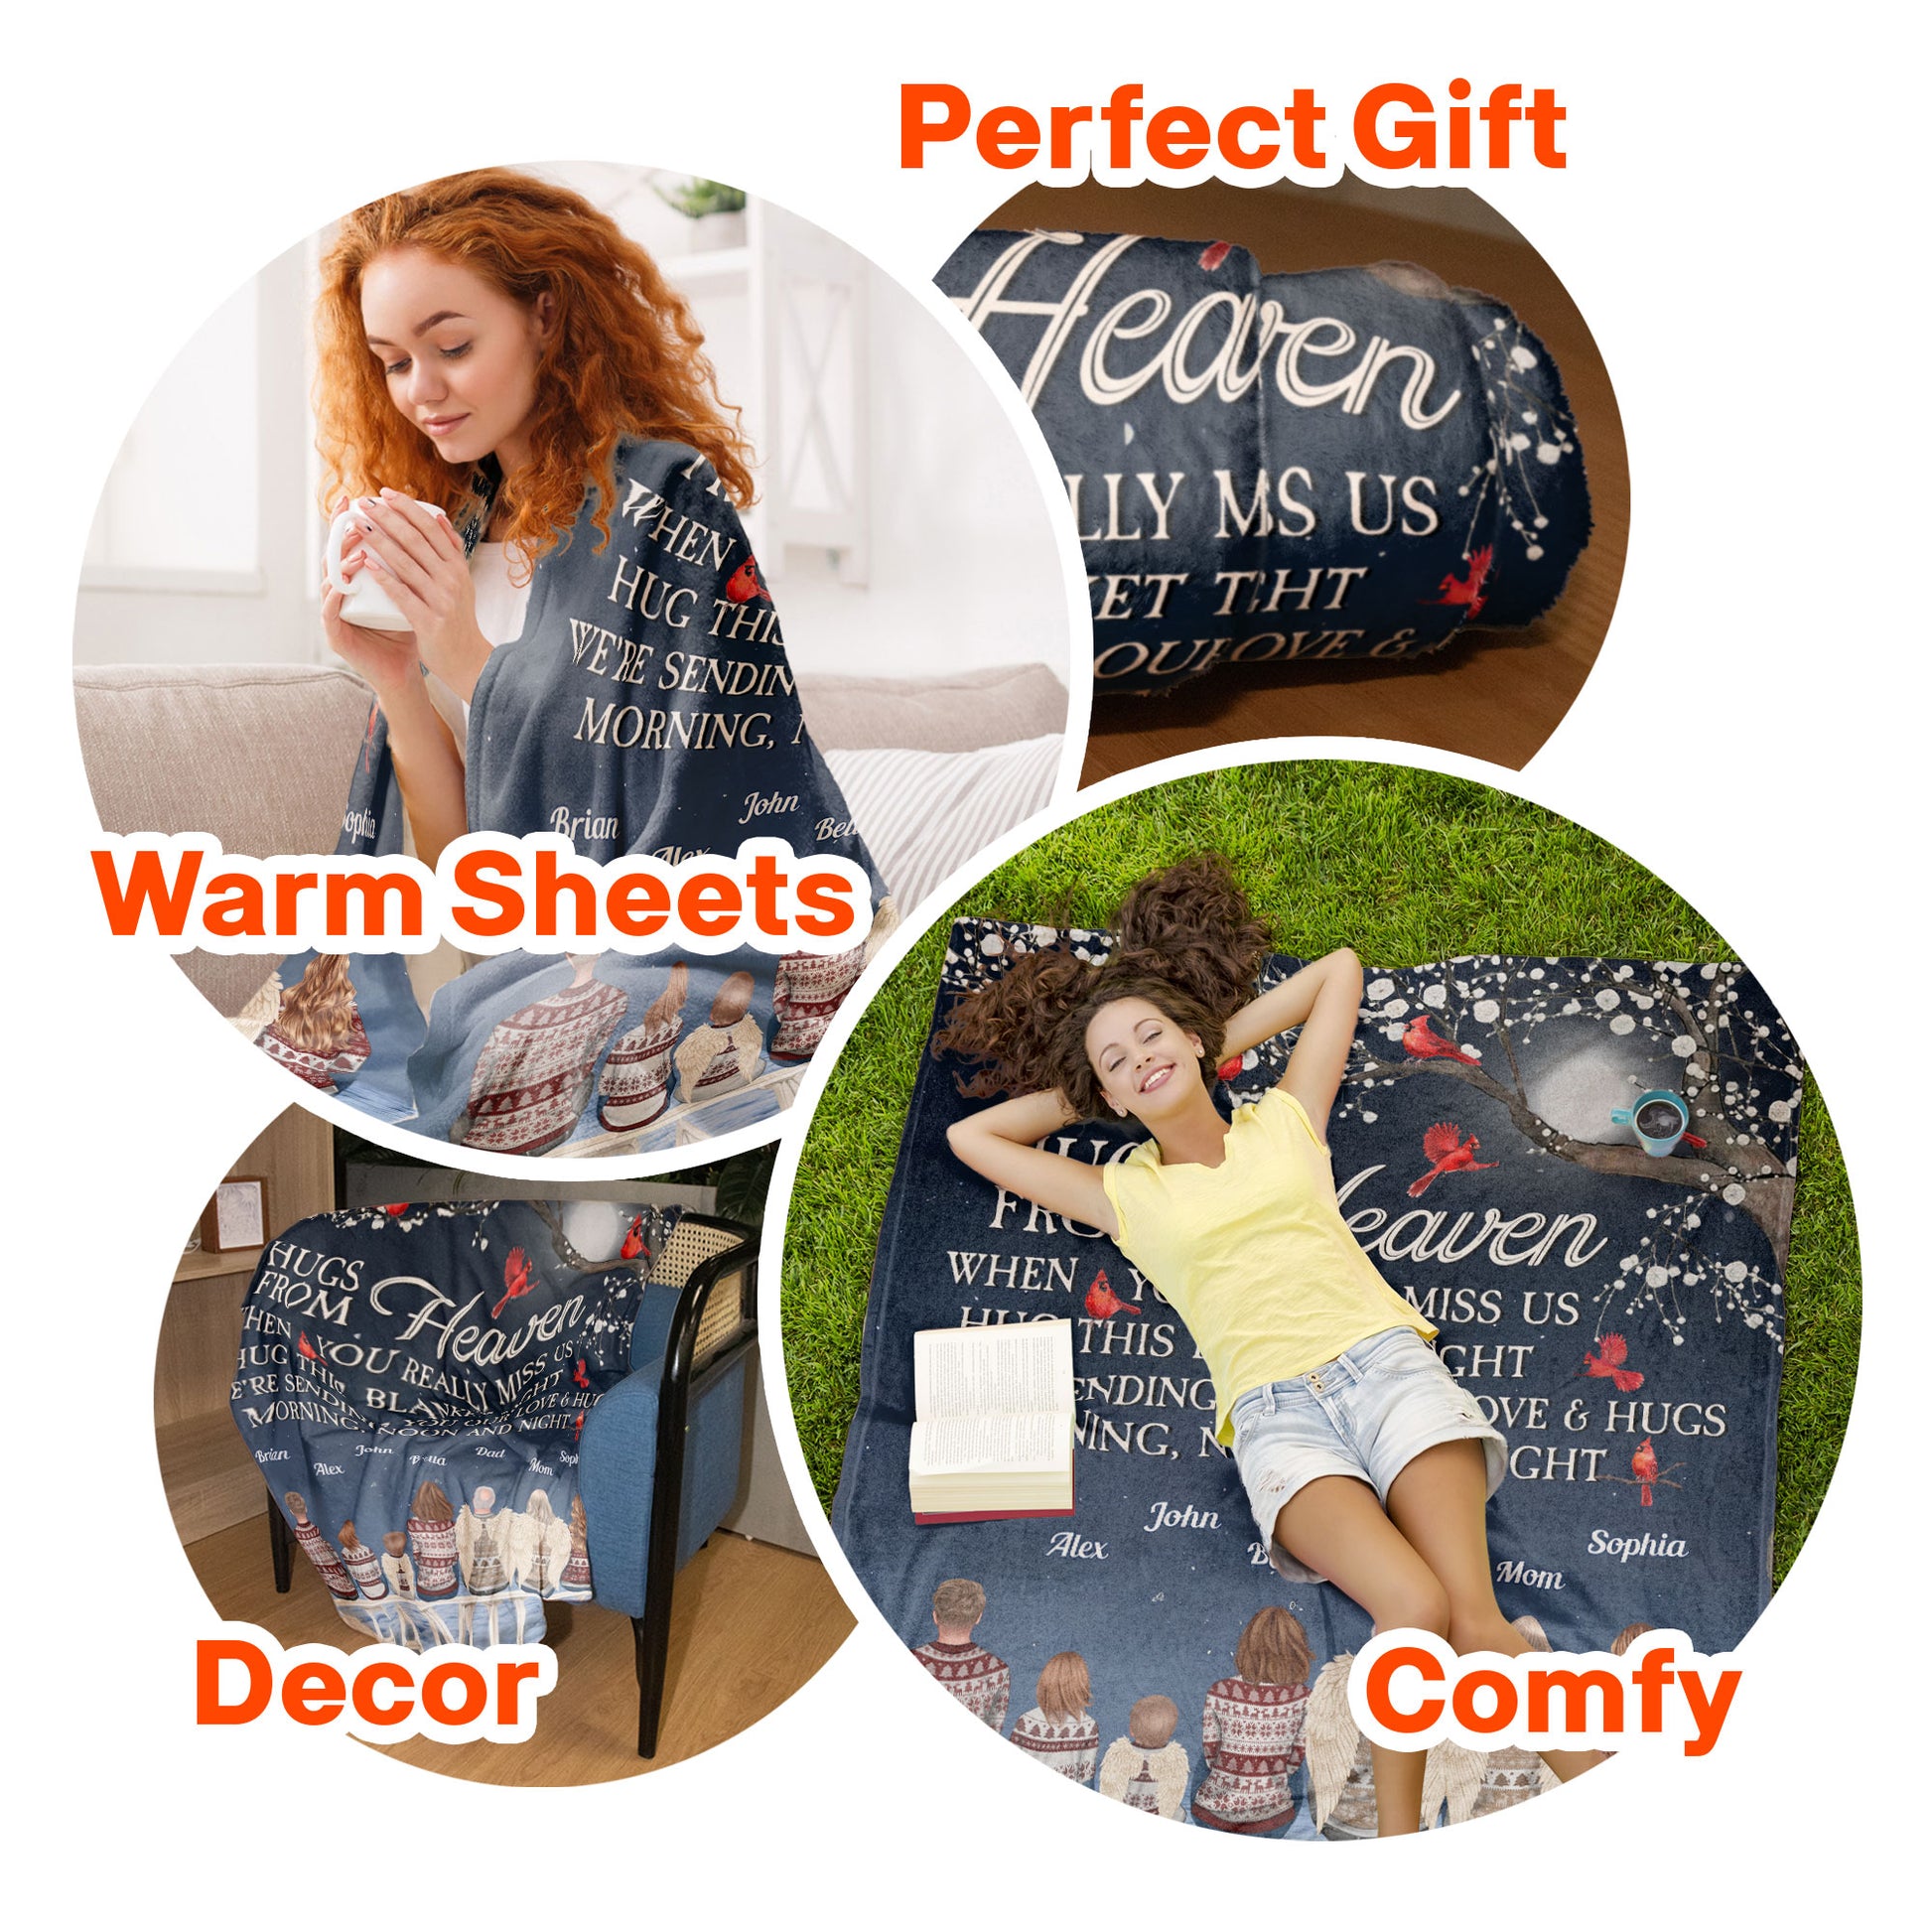 A Hug From Heaven Ver 2 - Personalized Blanket - Christmas Memorial Gift For Family Members, Mom, Dad, Siblings